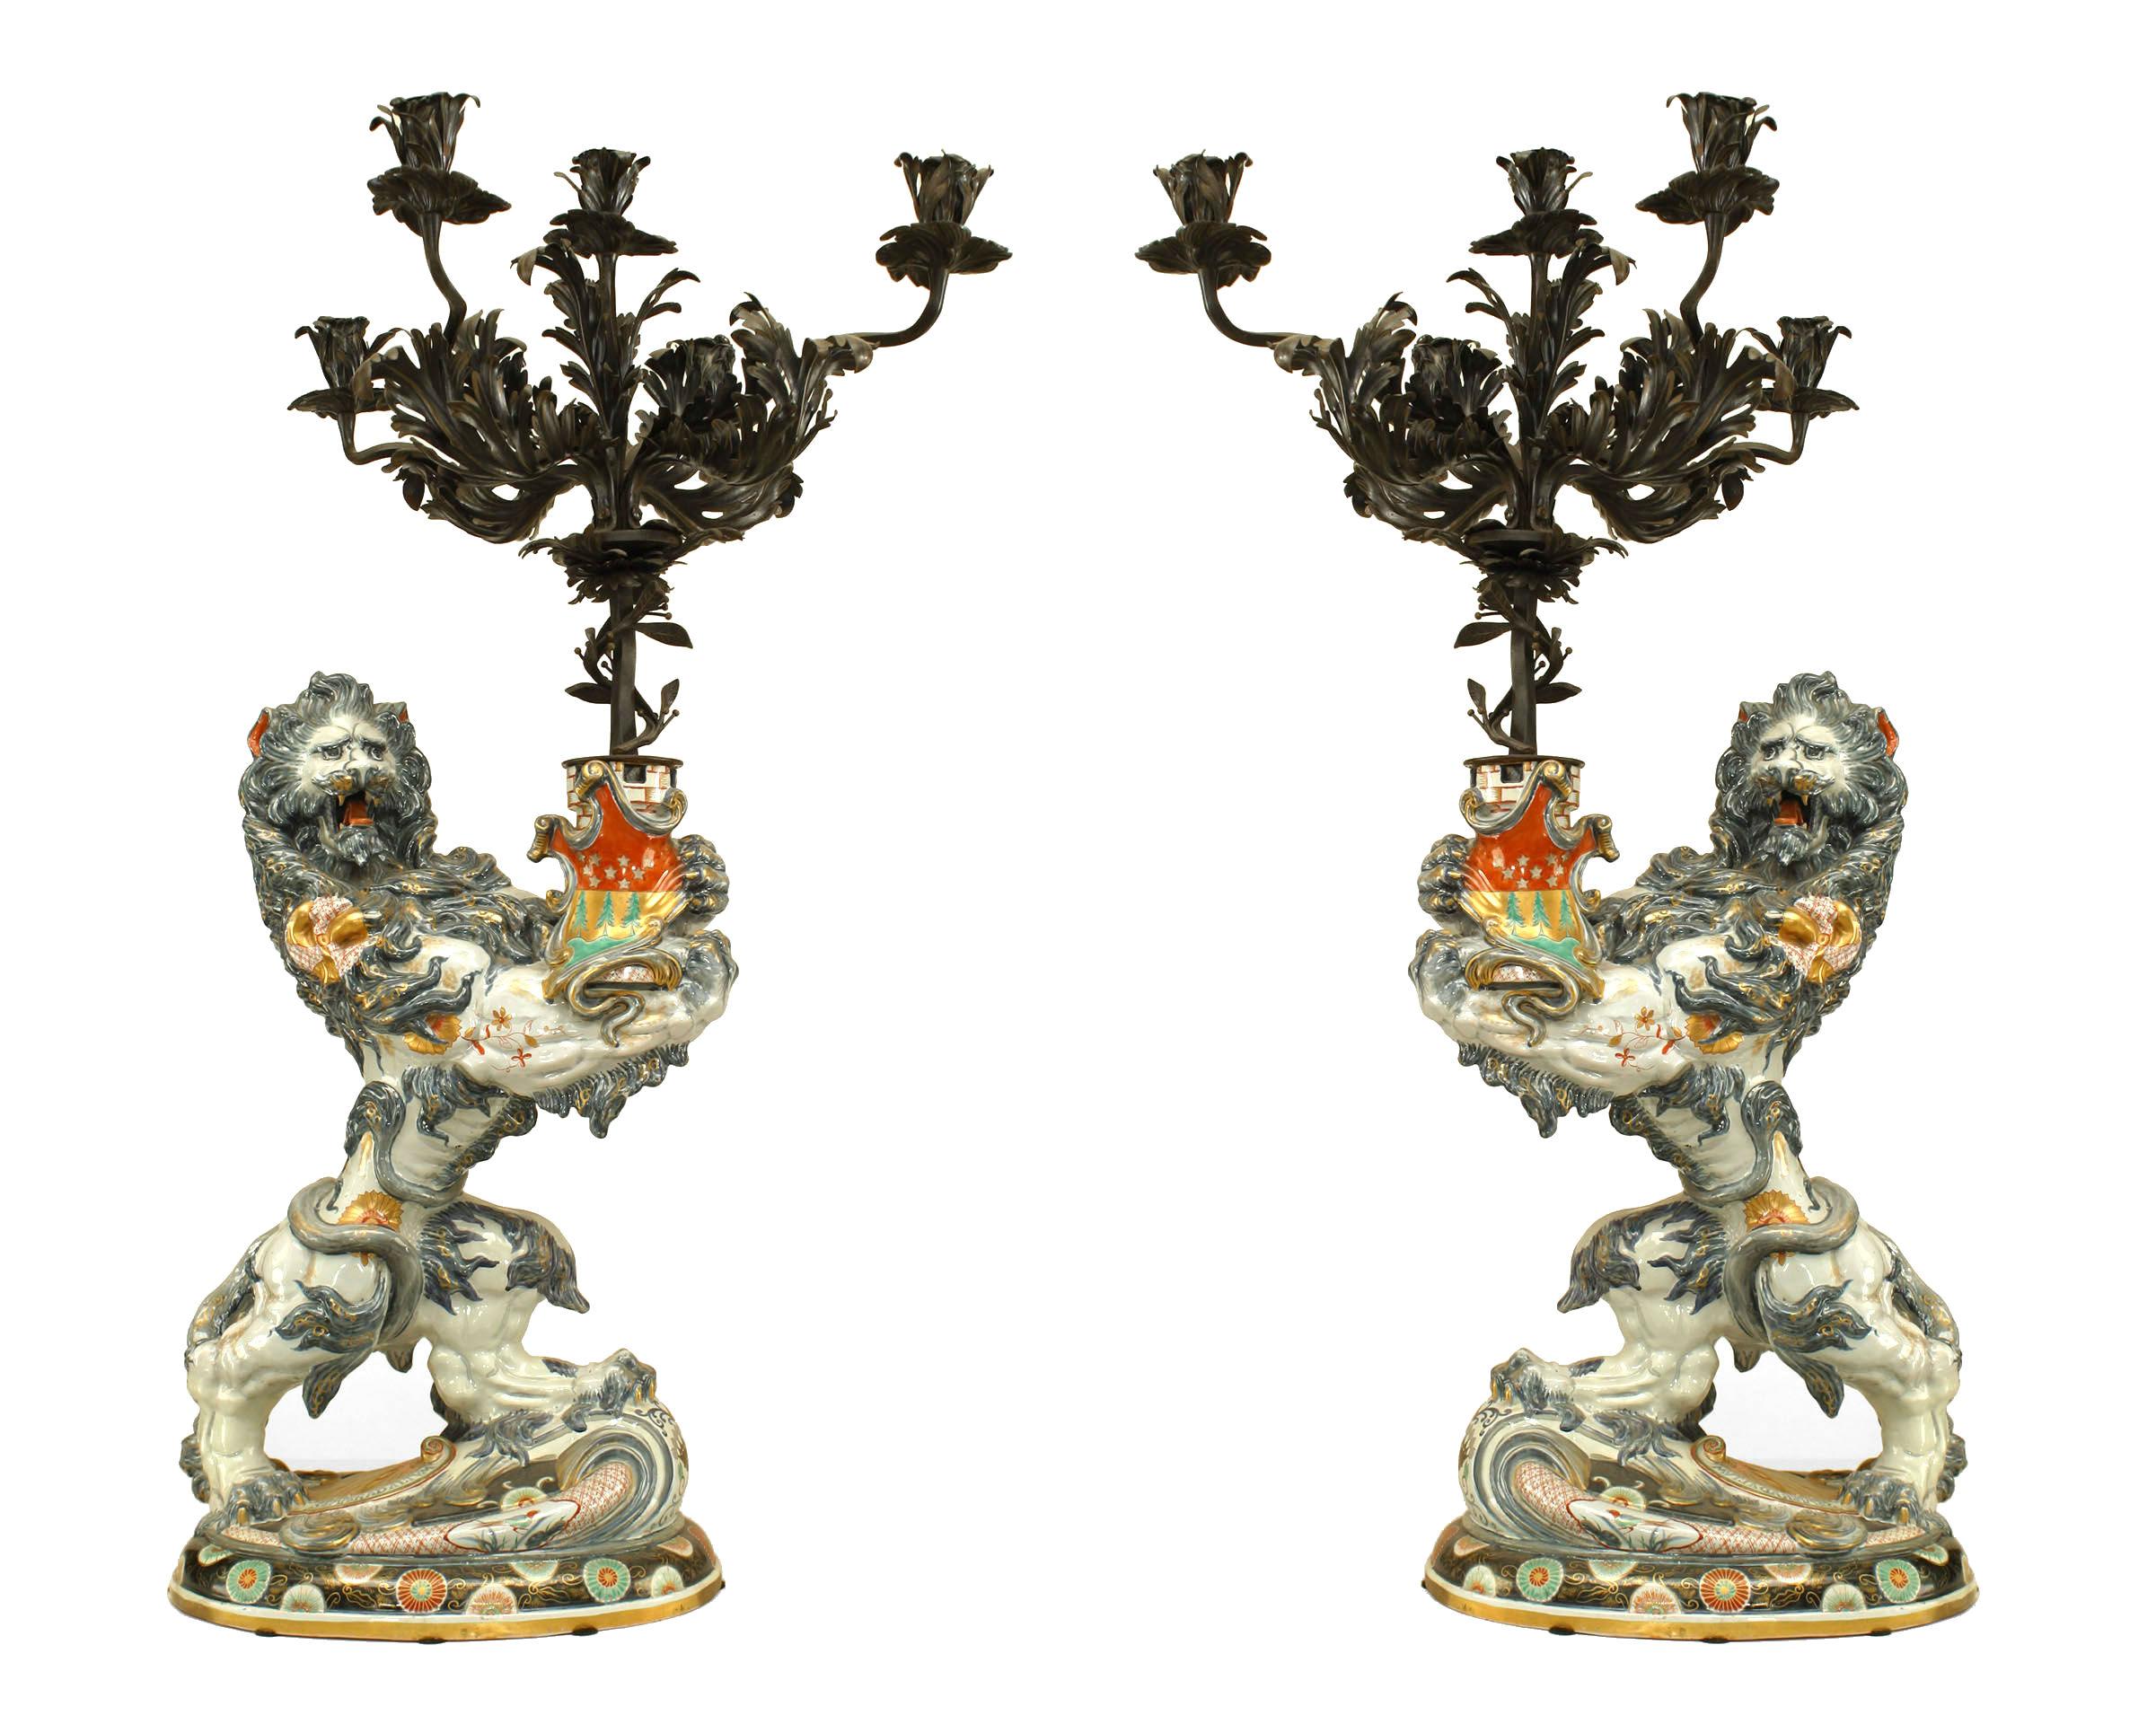 19th Century Pair of French Porcelain Lions Holding Wrought Iron Candelabras For Sale